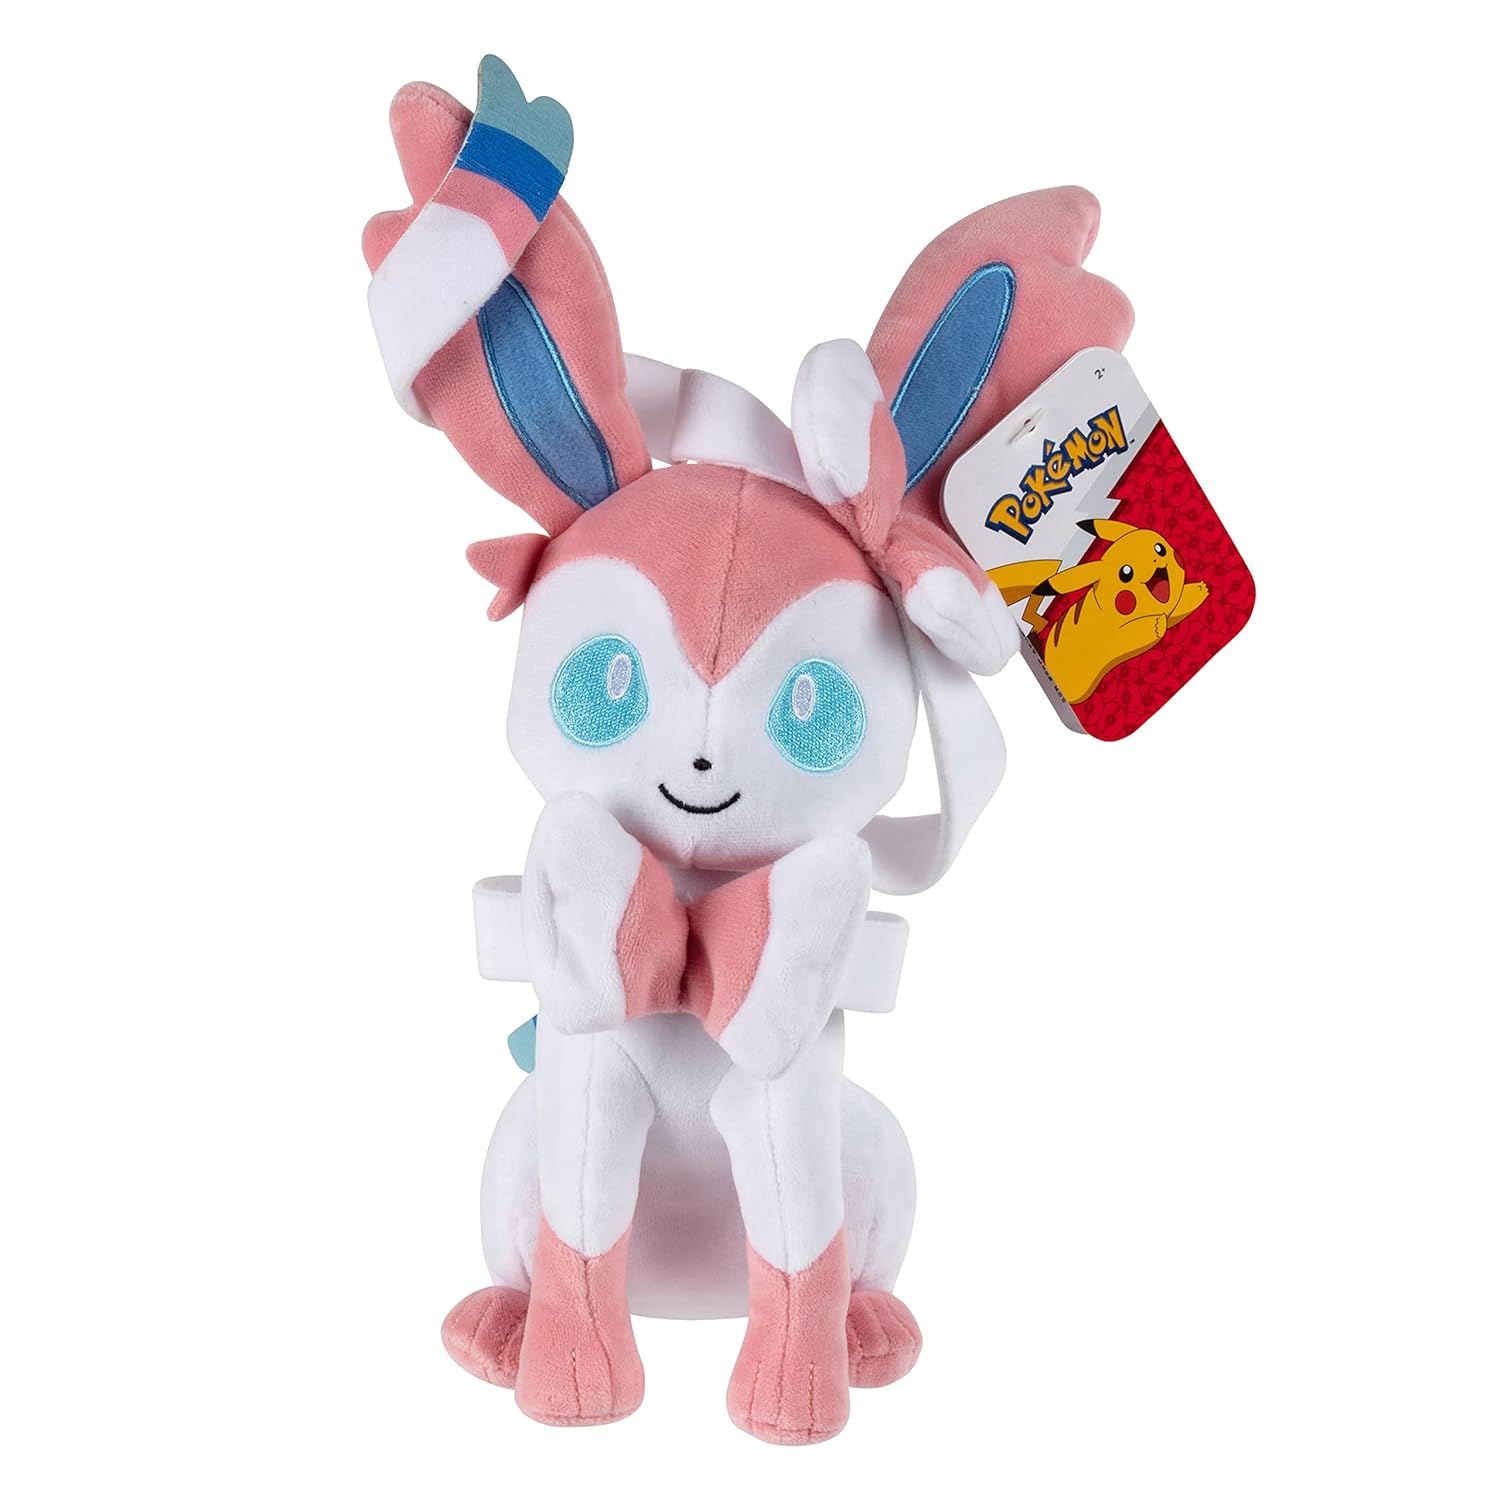 Great Choice Products Pokemon Sylveon 8" Plush Stuffed Animal Toy - Eevee Evolution - Officially Licensed - Gift For Kids